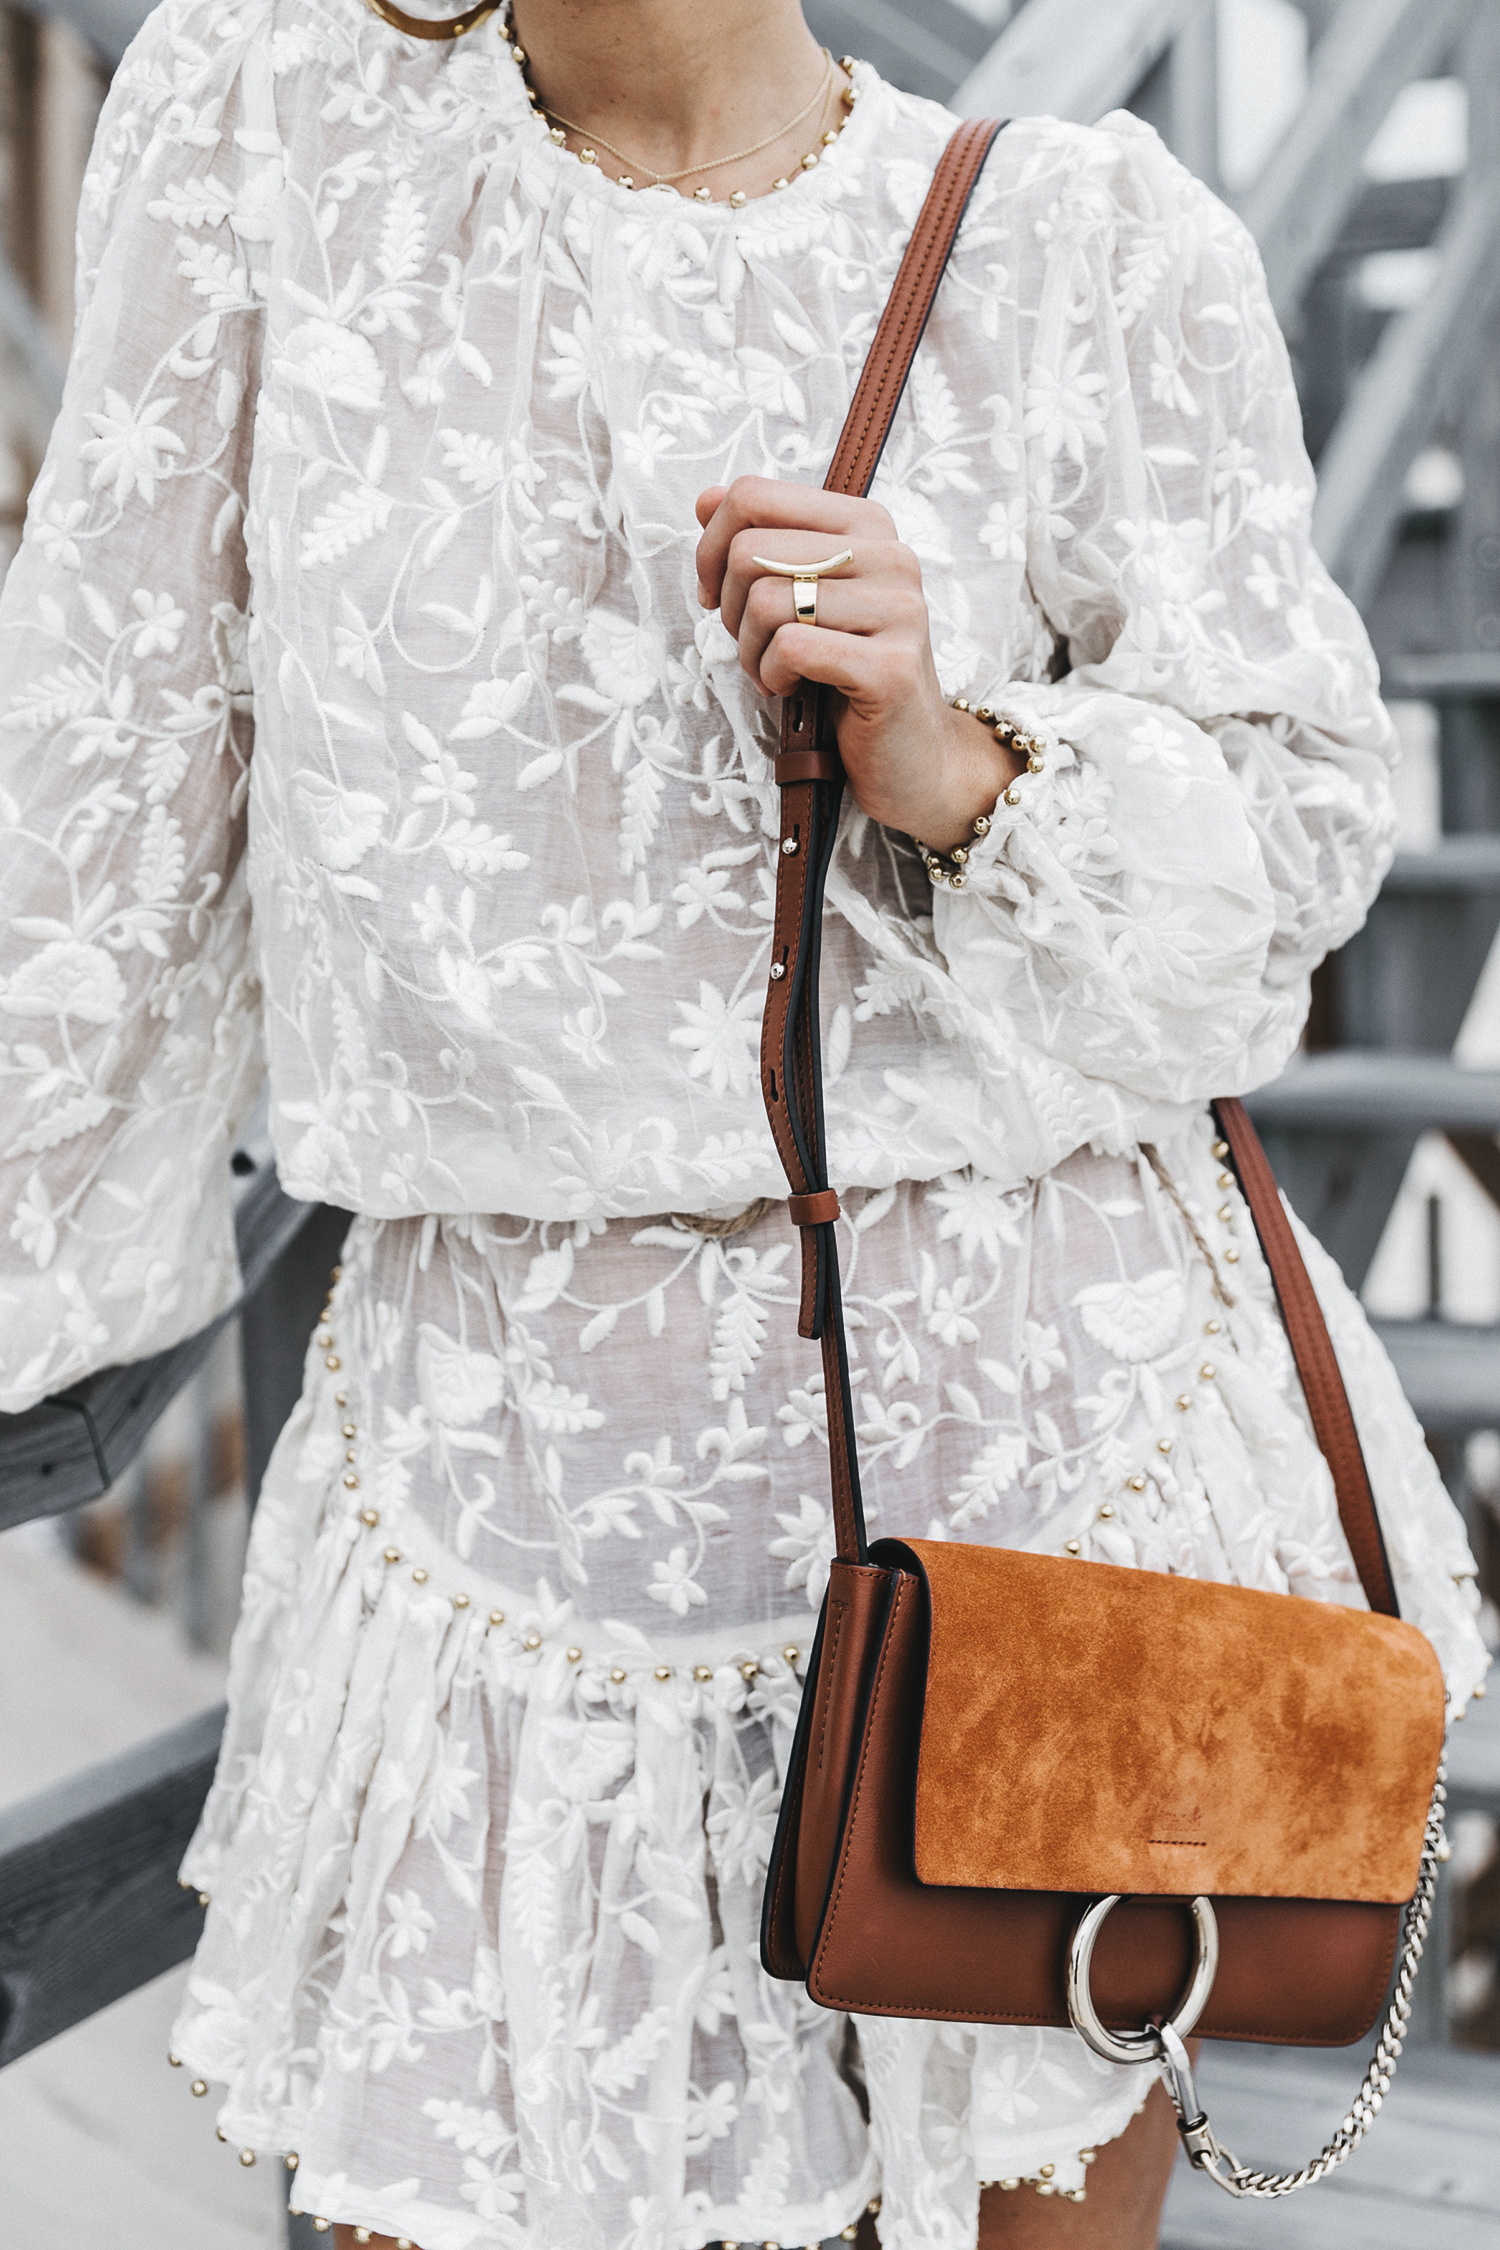 Revolve_in_The_Hamptons-Zimmermann-Embroidered_Dress-WHite_Dress-Chloe_Fay_Bag-Chloe_Wedges-Outfit-93